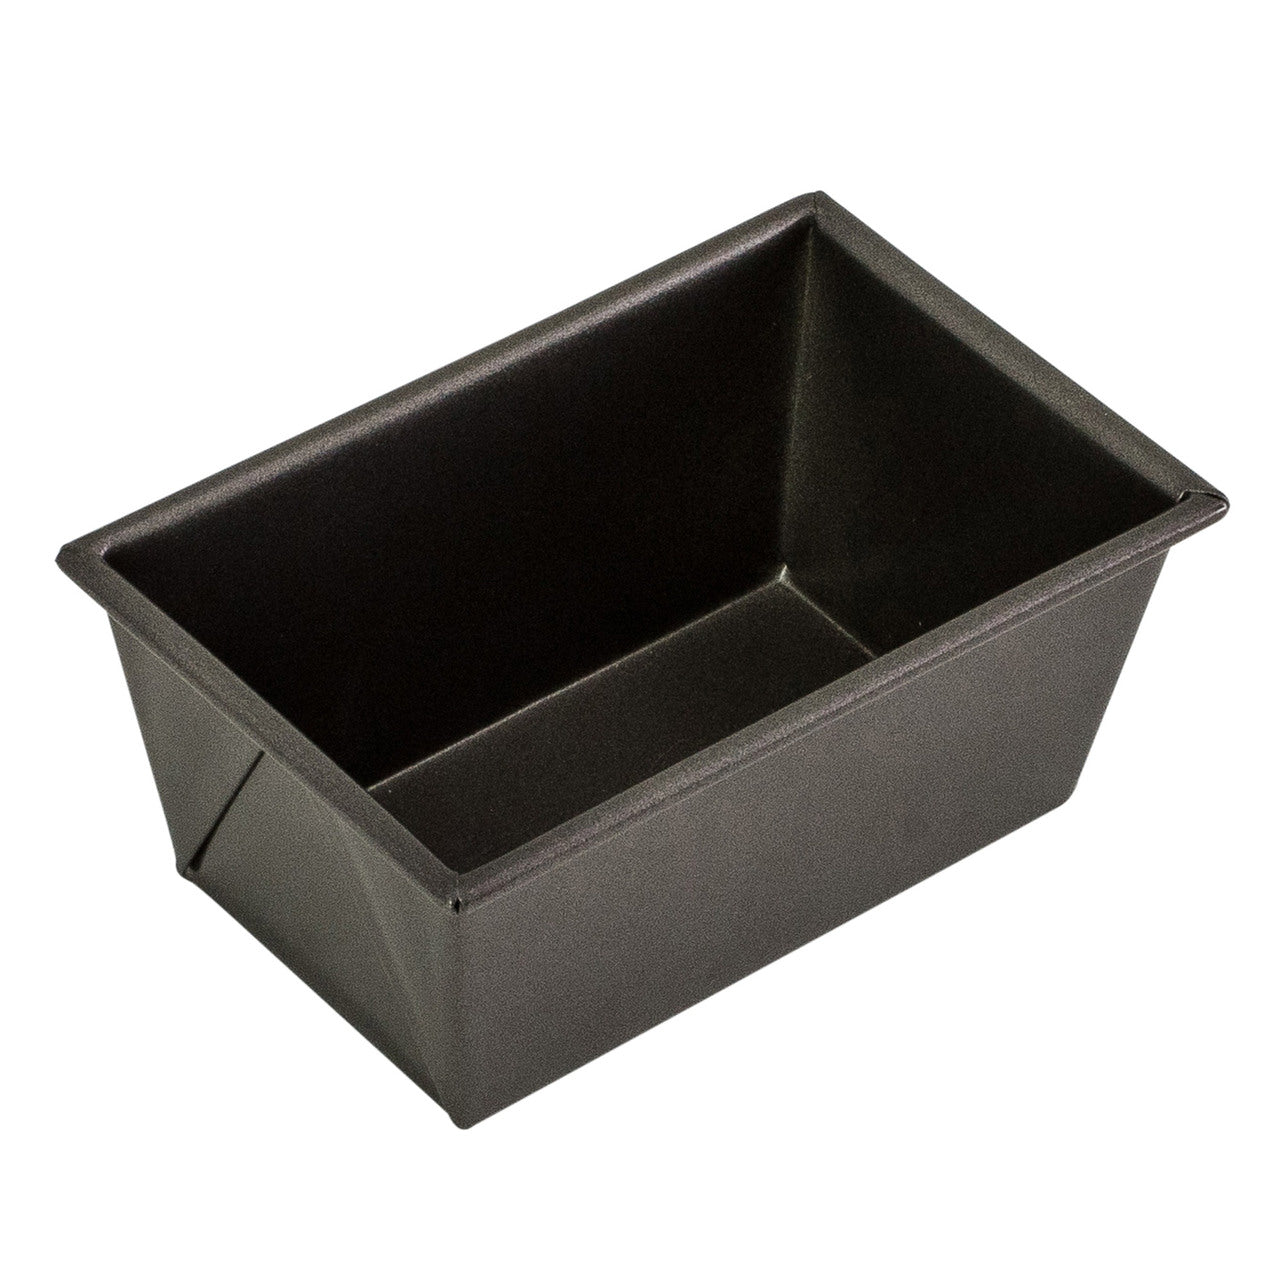 Box Sided Loaf Pan, 15 X 9 X 7cm - Non-Stick